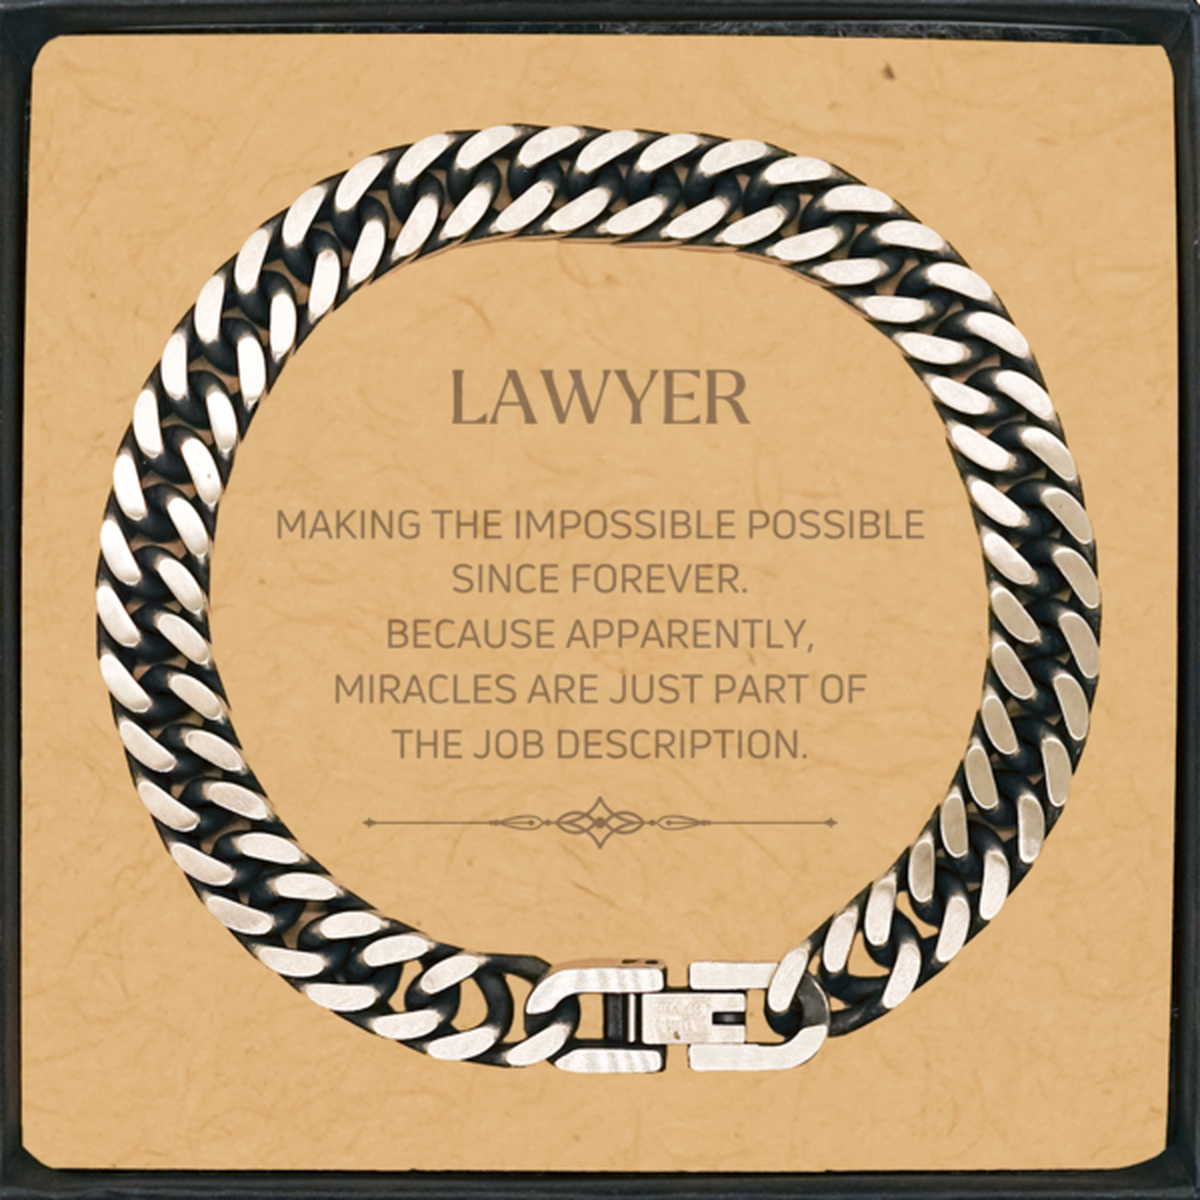 Funny Lawyer Gifts, Miracles are just part of the job description, Inspirational Birthday Cuban Link Chain Bracelet For Lawyer, Men, Women, Coworkers, Friends, Boss